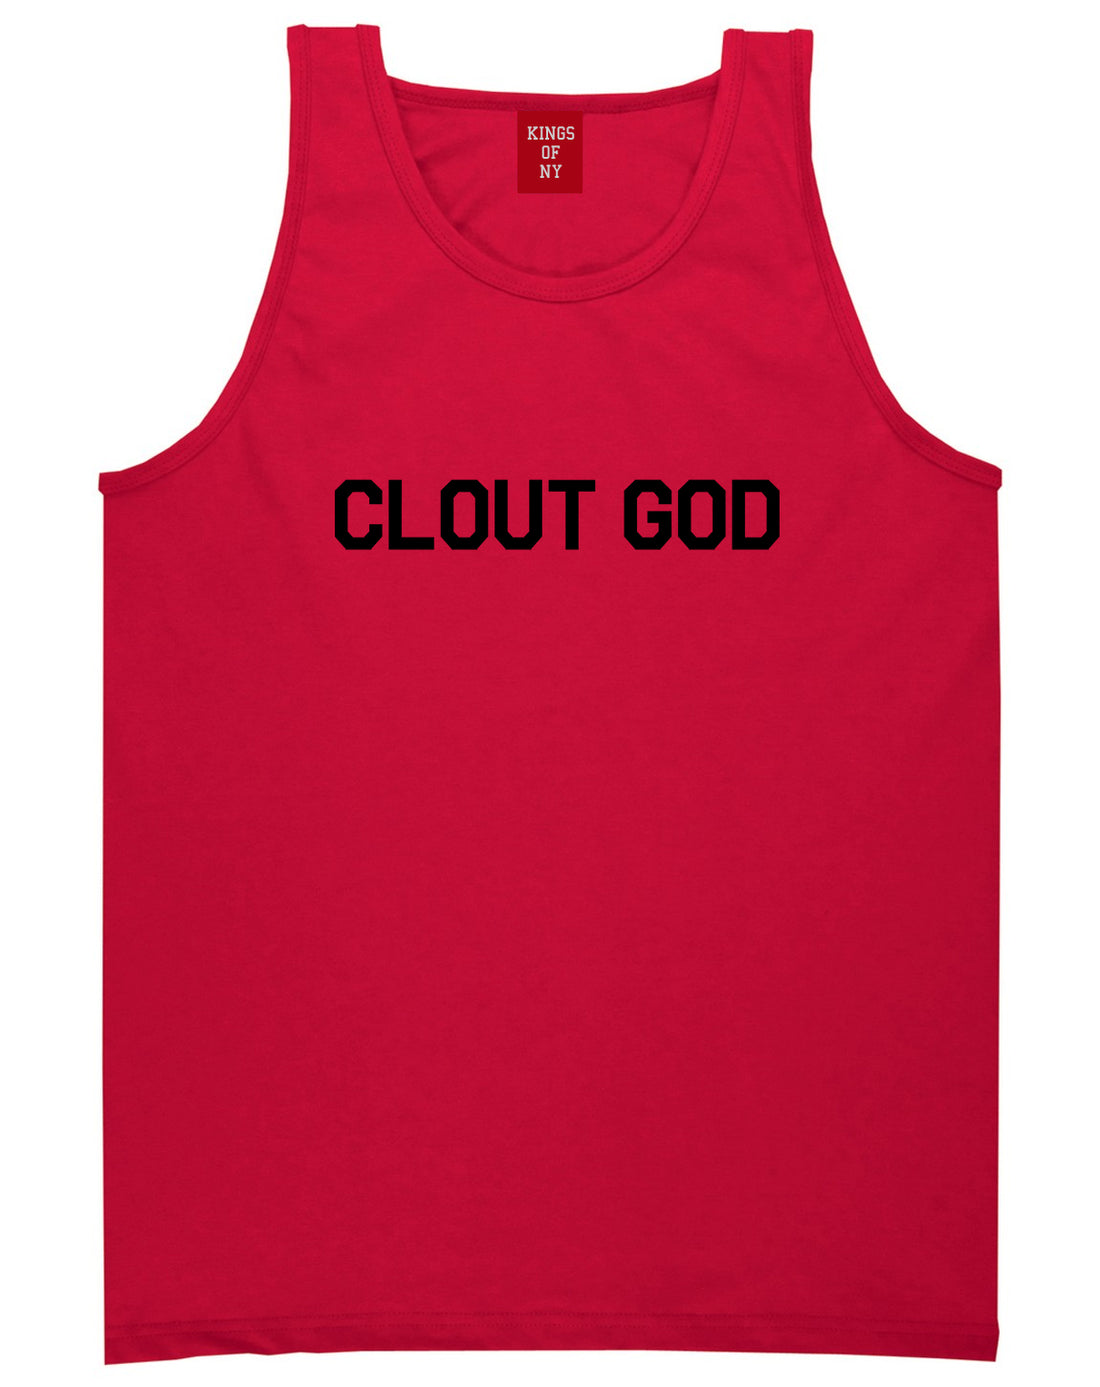 Clout God Mens Tank Top Shirt Red by Kings Of NY